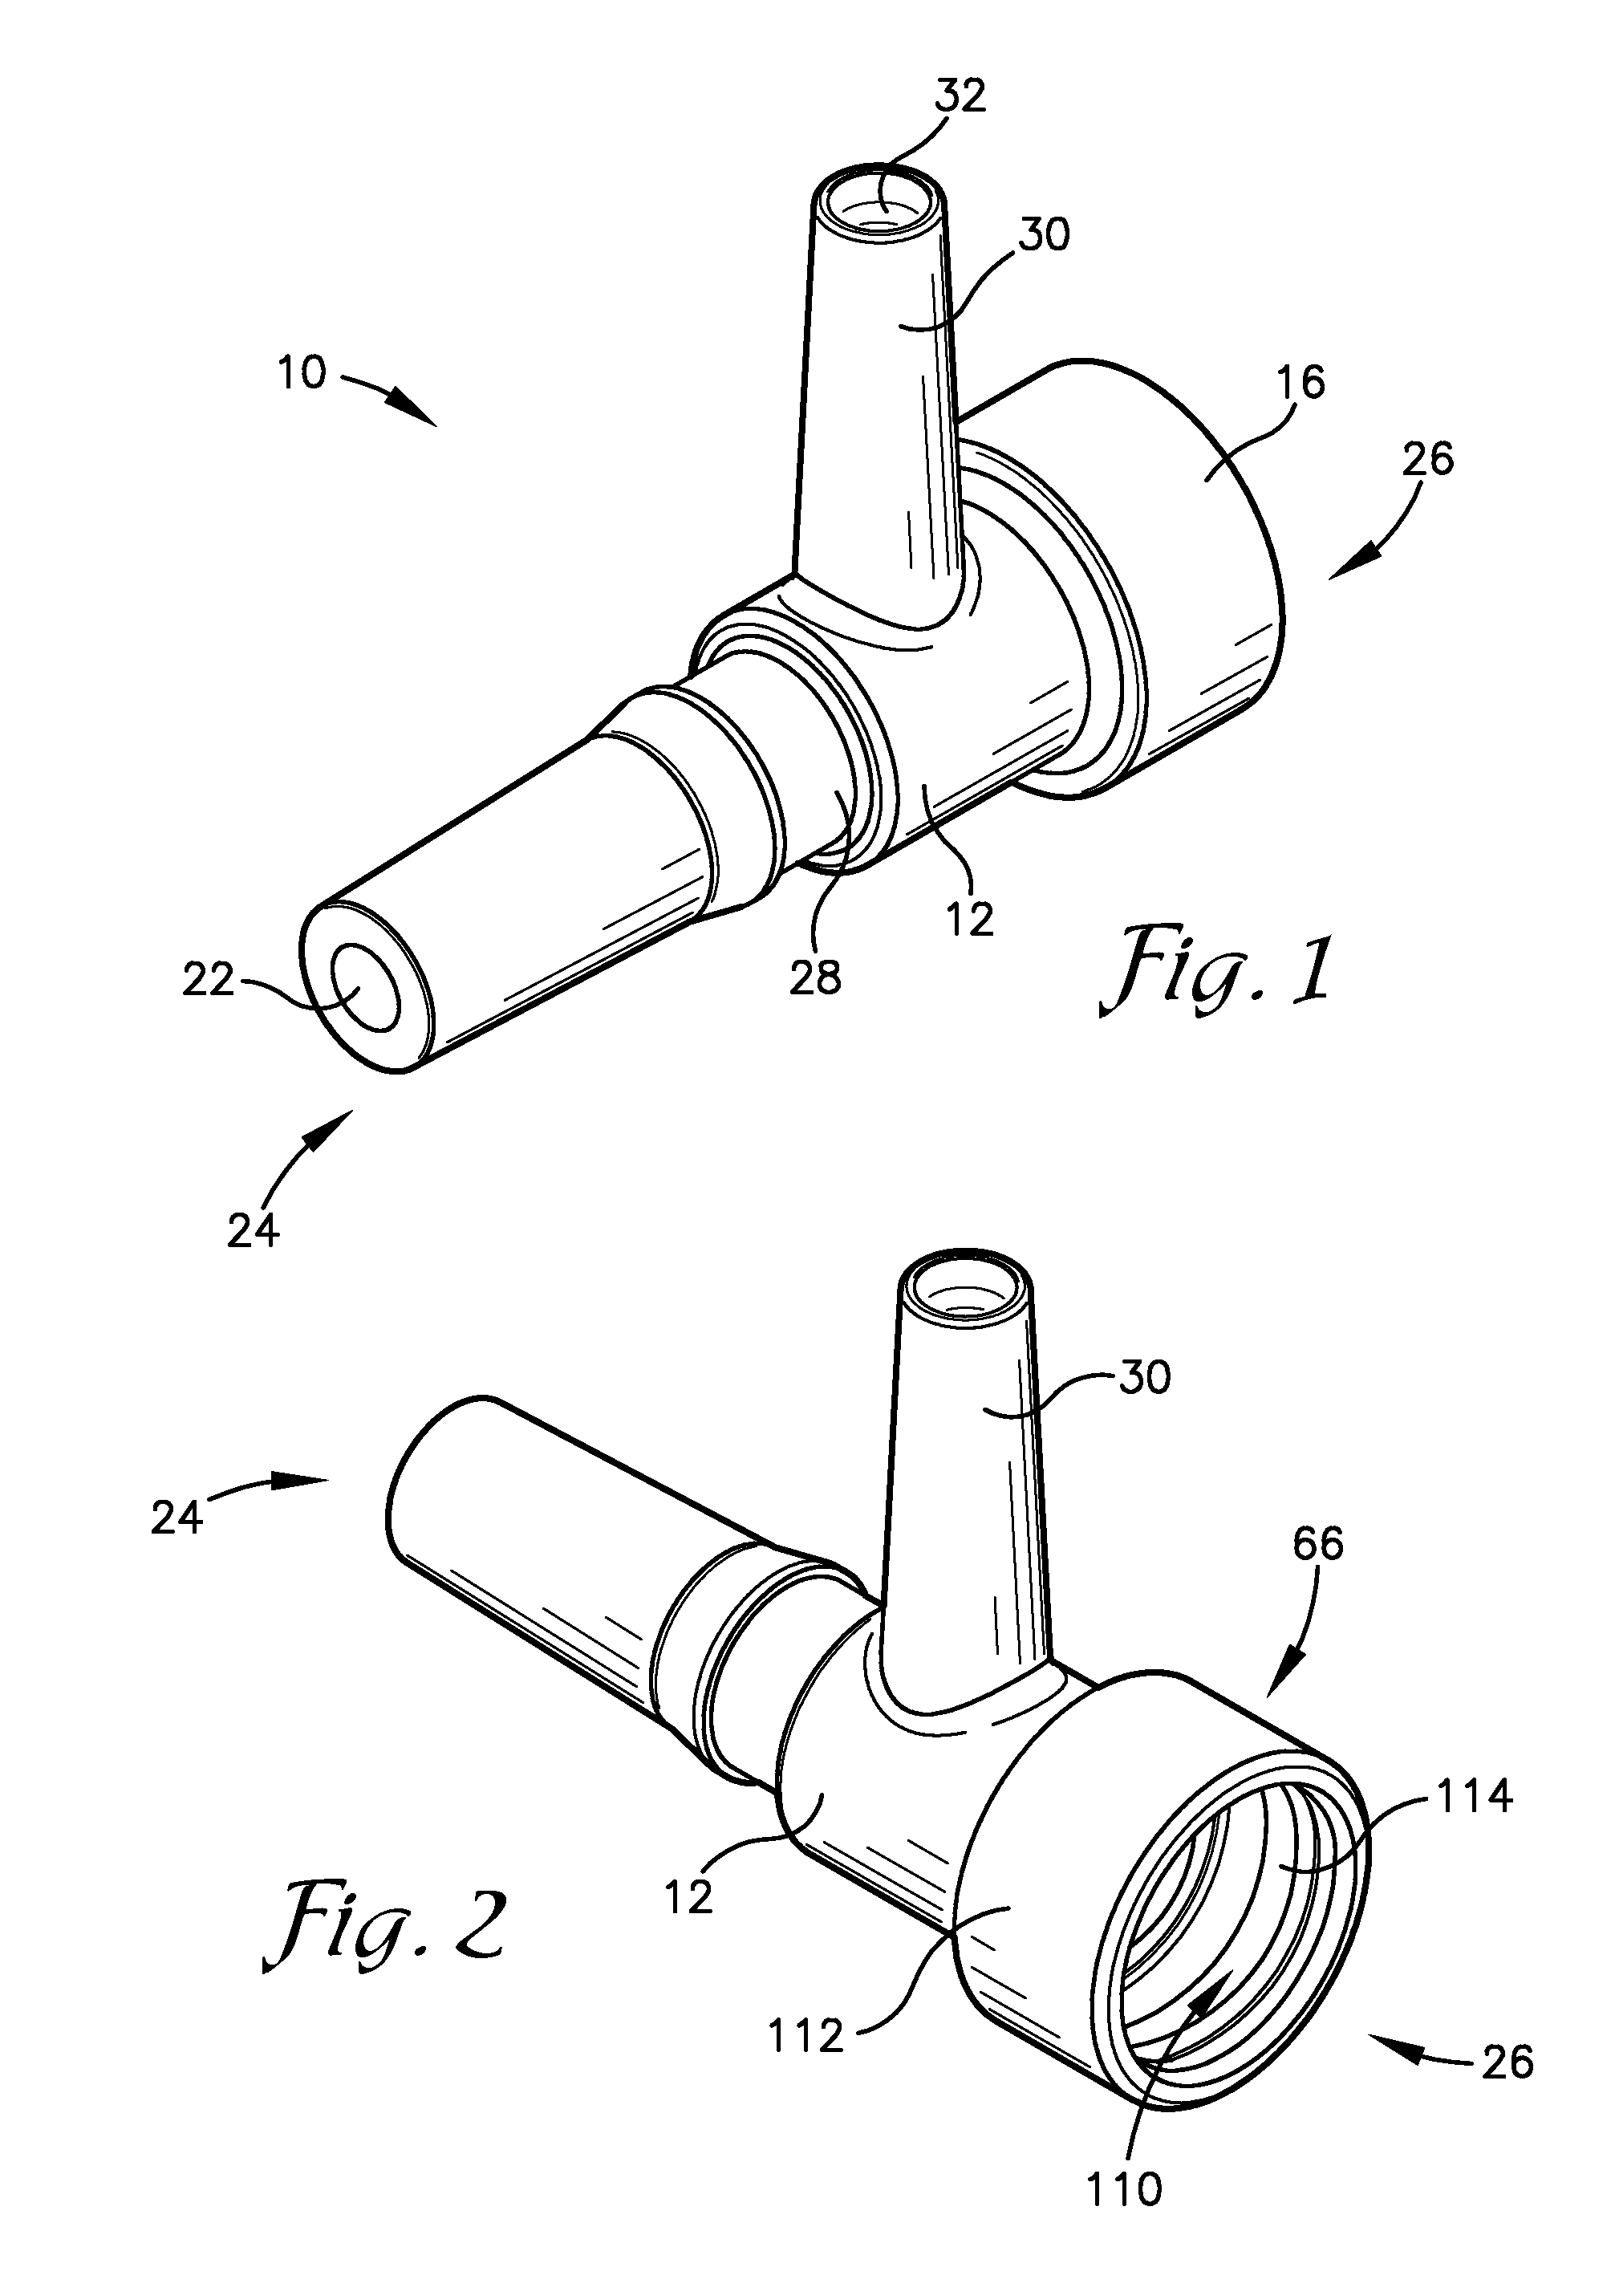 Split septum assembly for an intravenous injection site